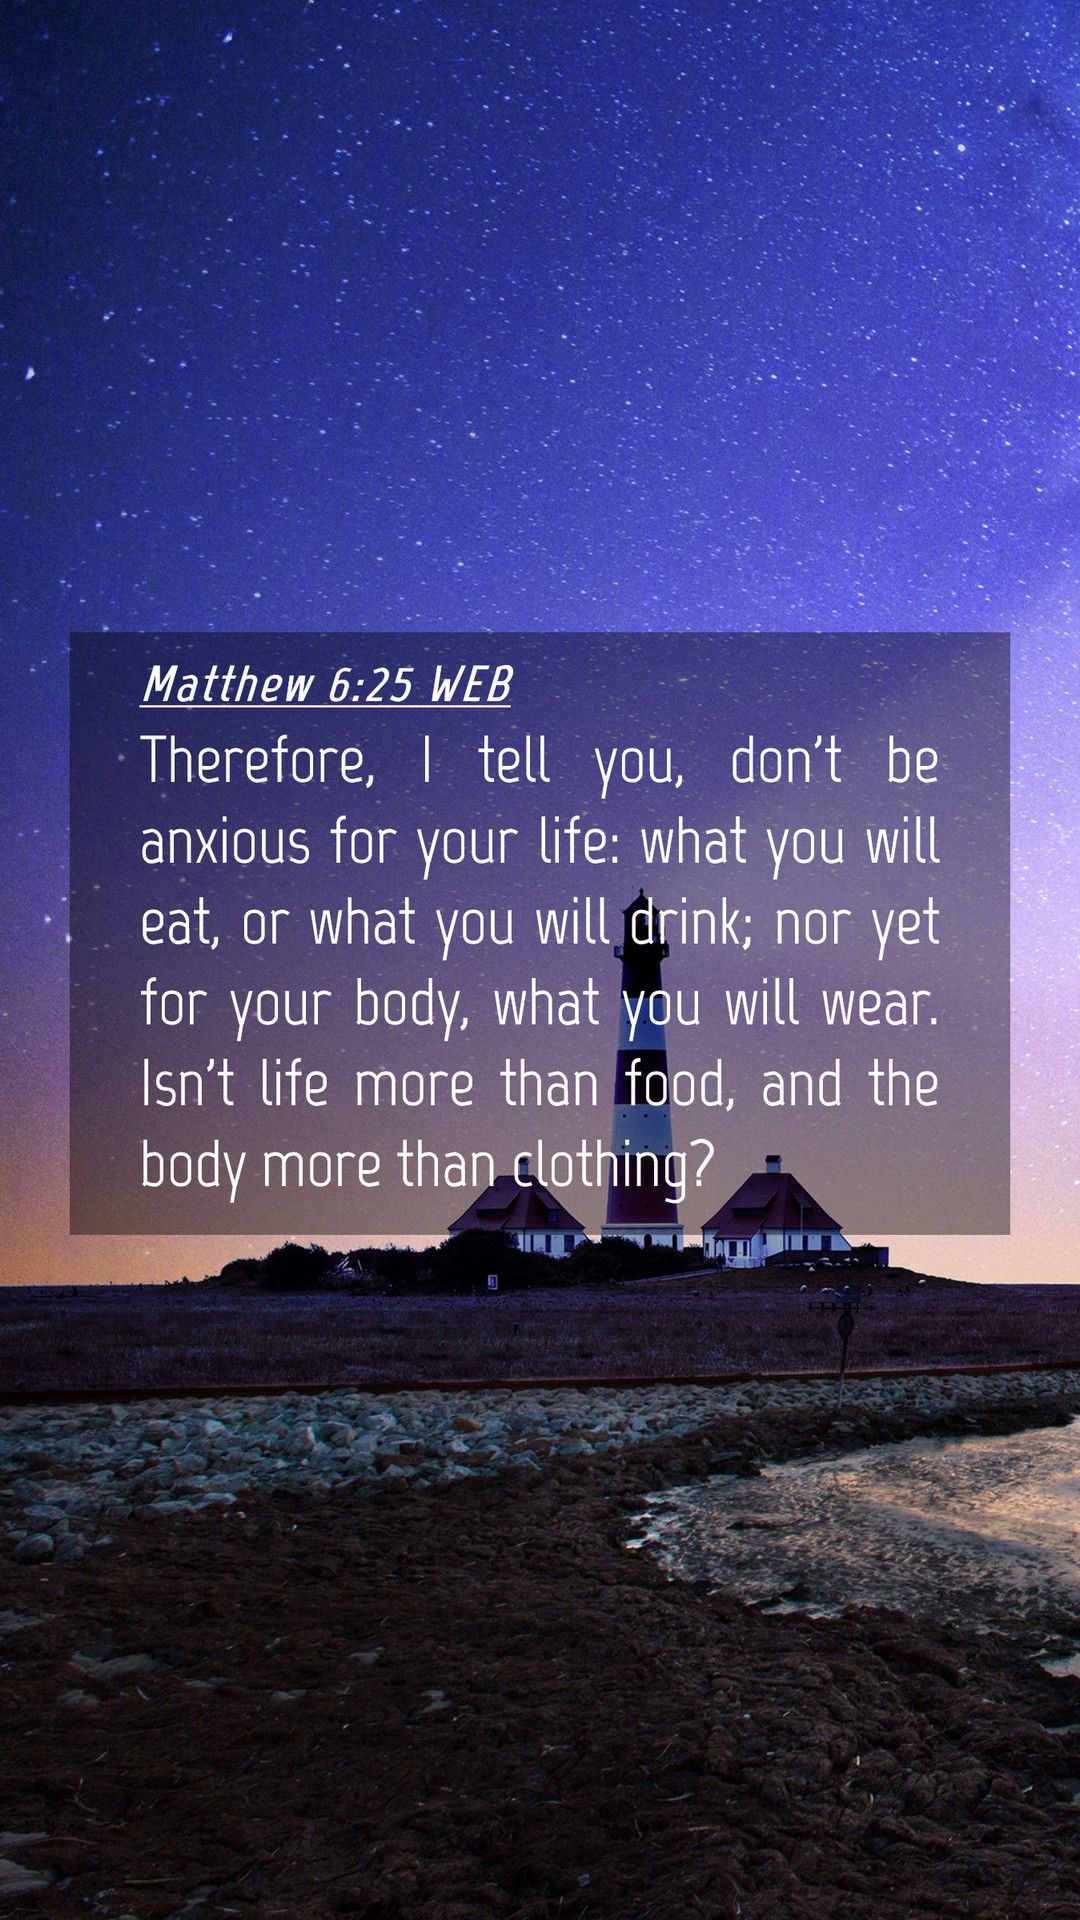 Matthew 6:25 WEB Mobile Phone Wallpaper, I tell you, don't be anxious for your